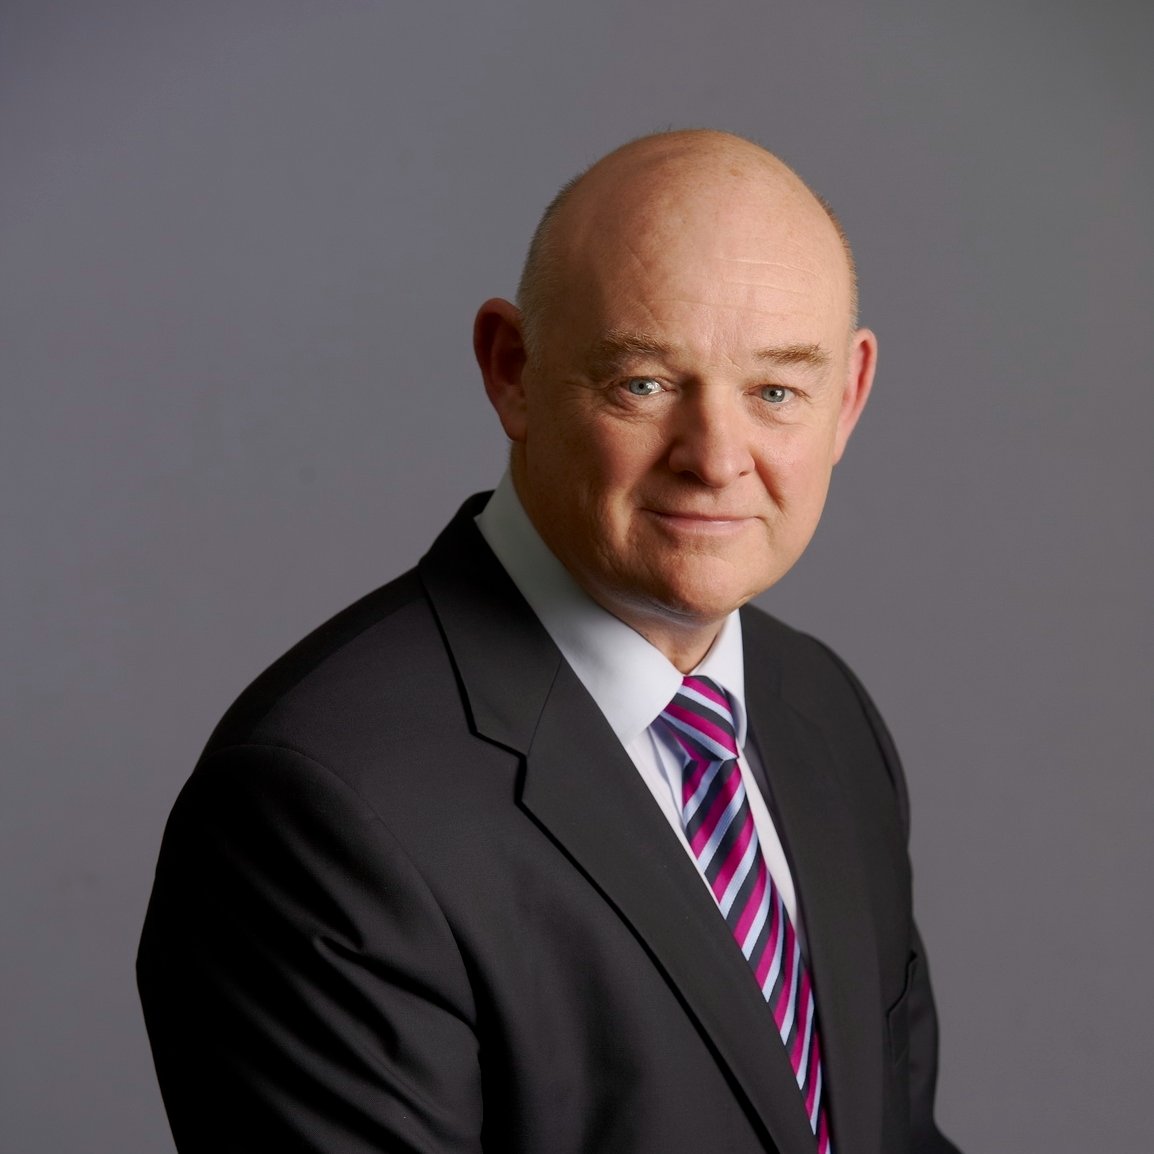 Peter Dixon has stepped down as chairman of Phoenix, after almost 30 years with the energy group